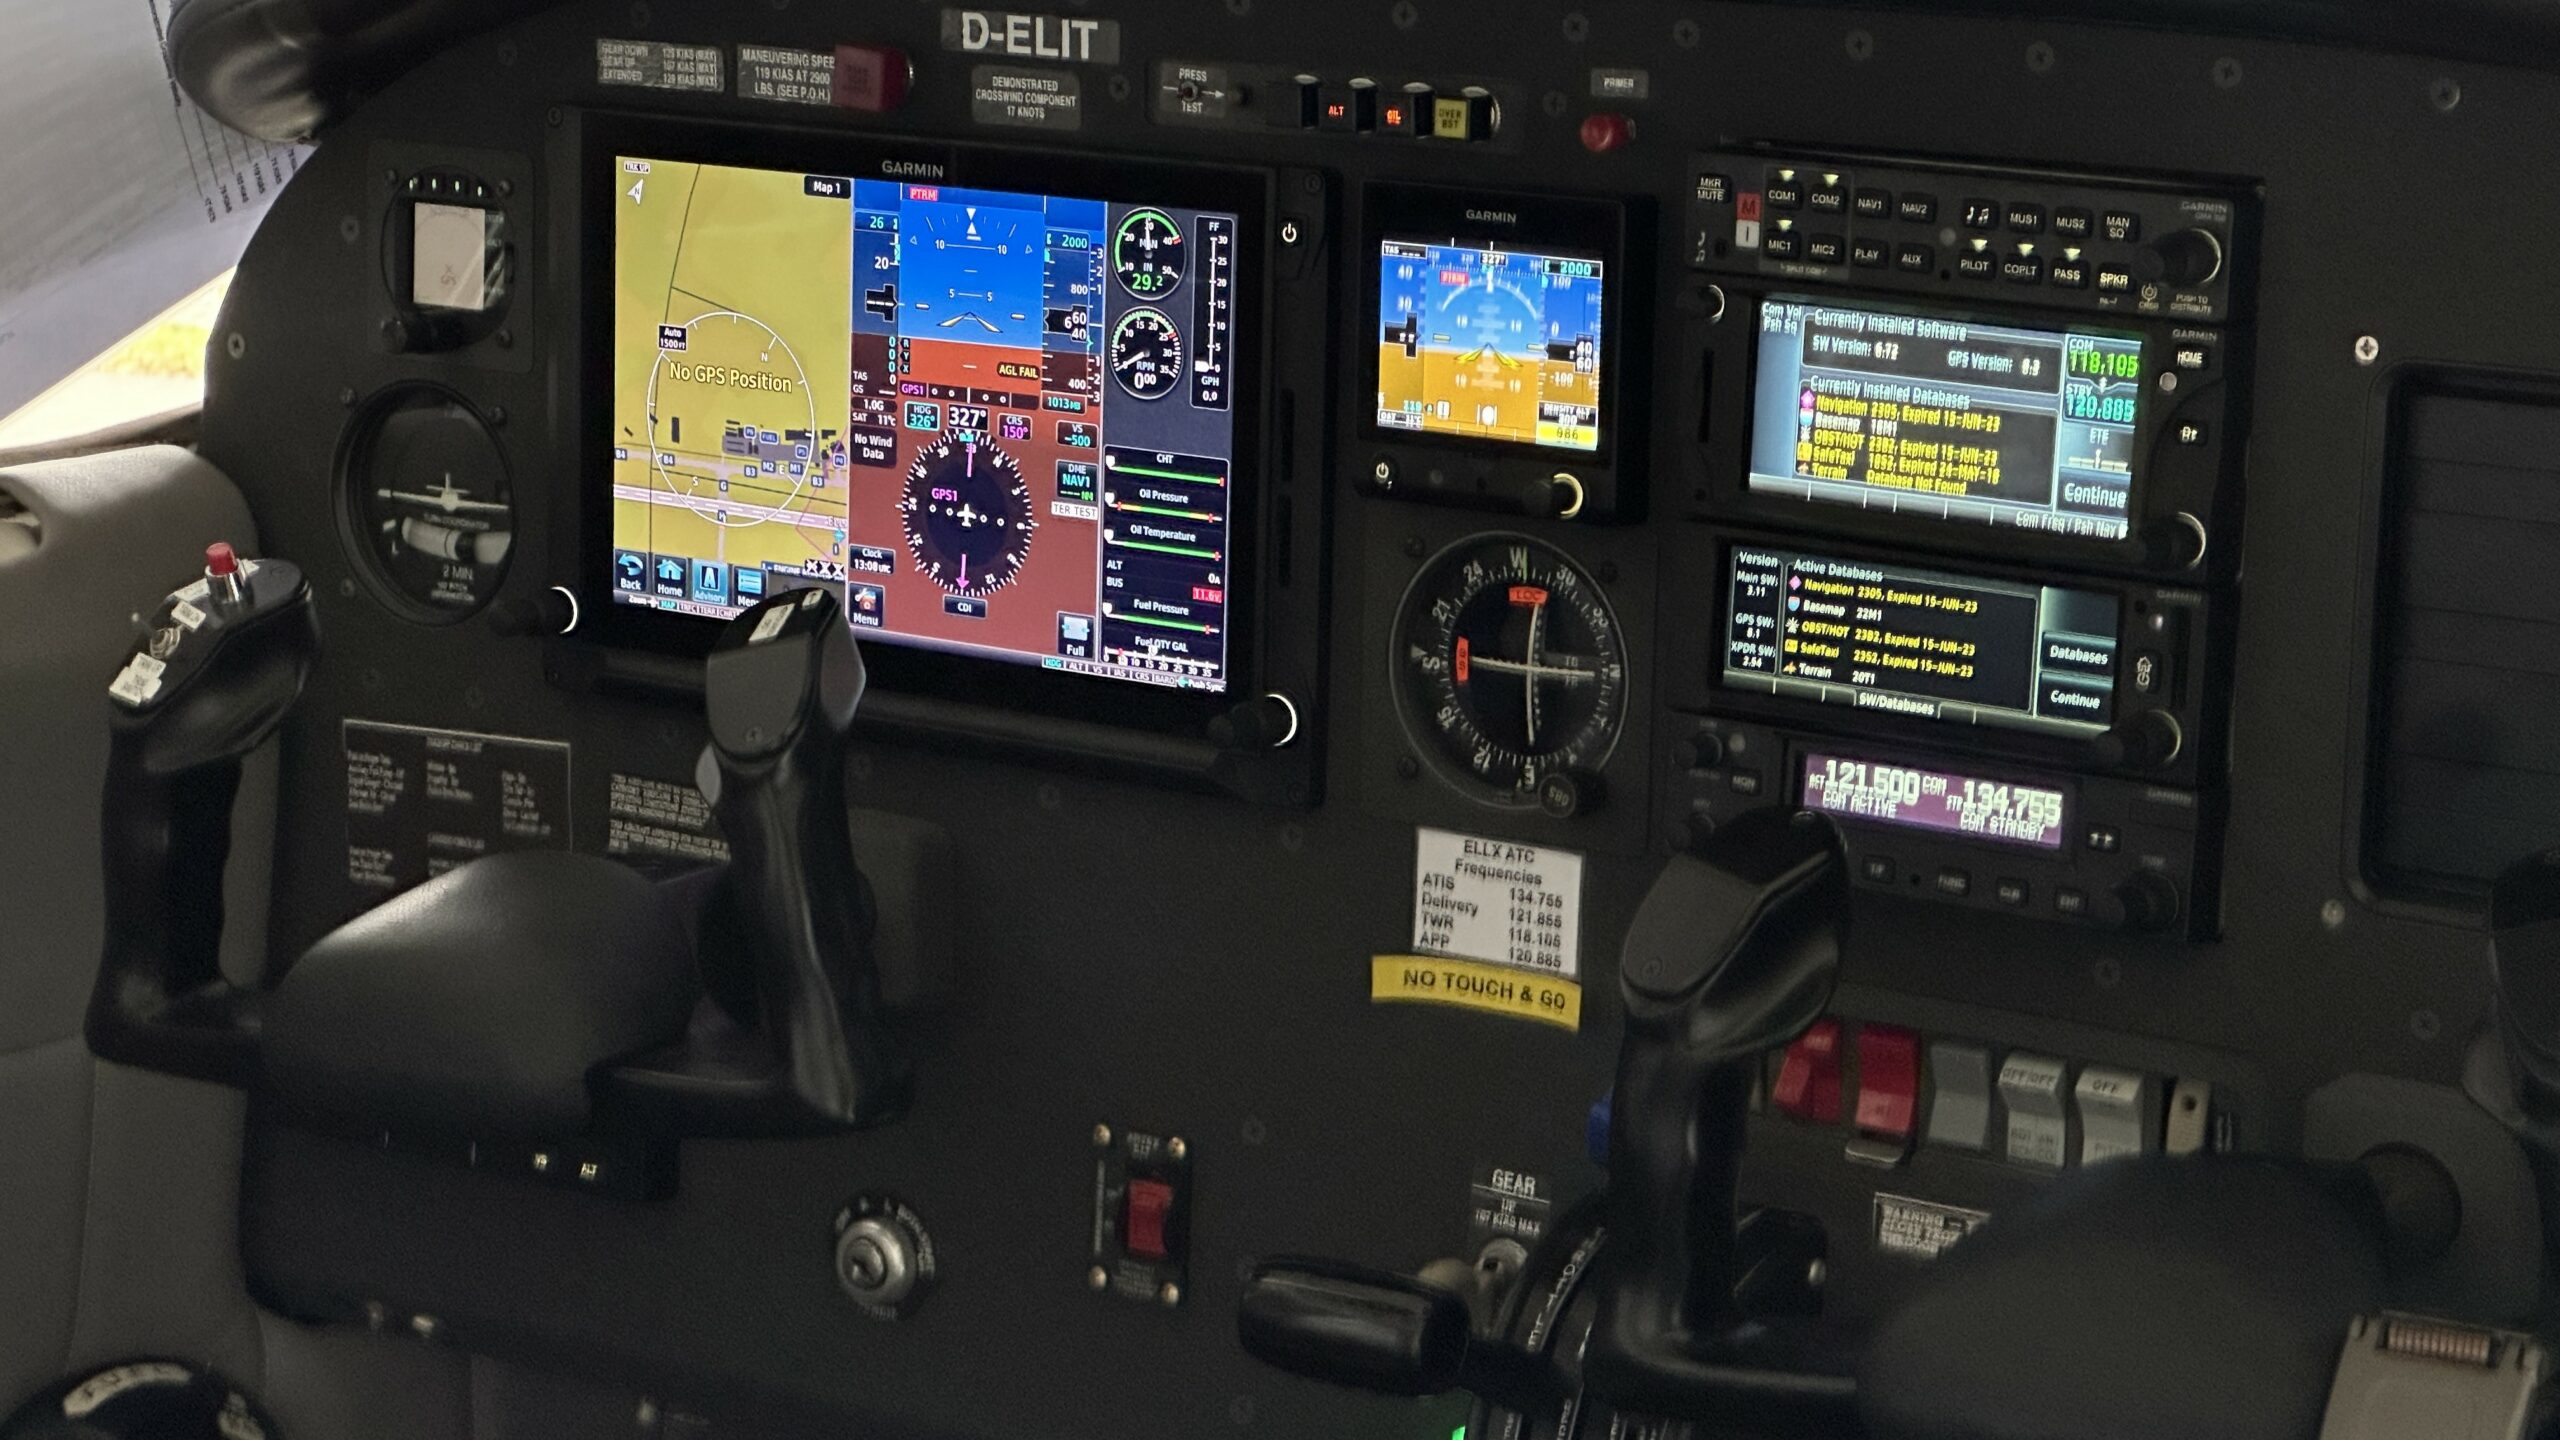 We also provide training courses for Instrument Rating (IR), Multi-Engine Rating (MEP), Commercial (CPL) and Air Transport Pilot Licenses (ATPL).